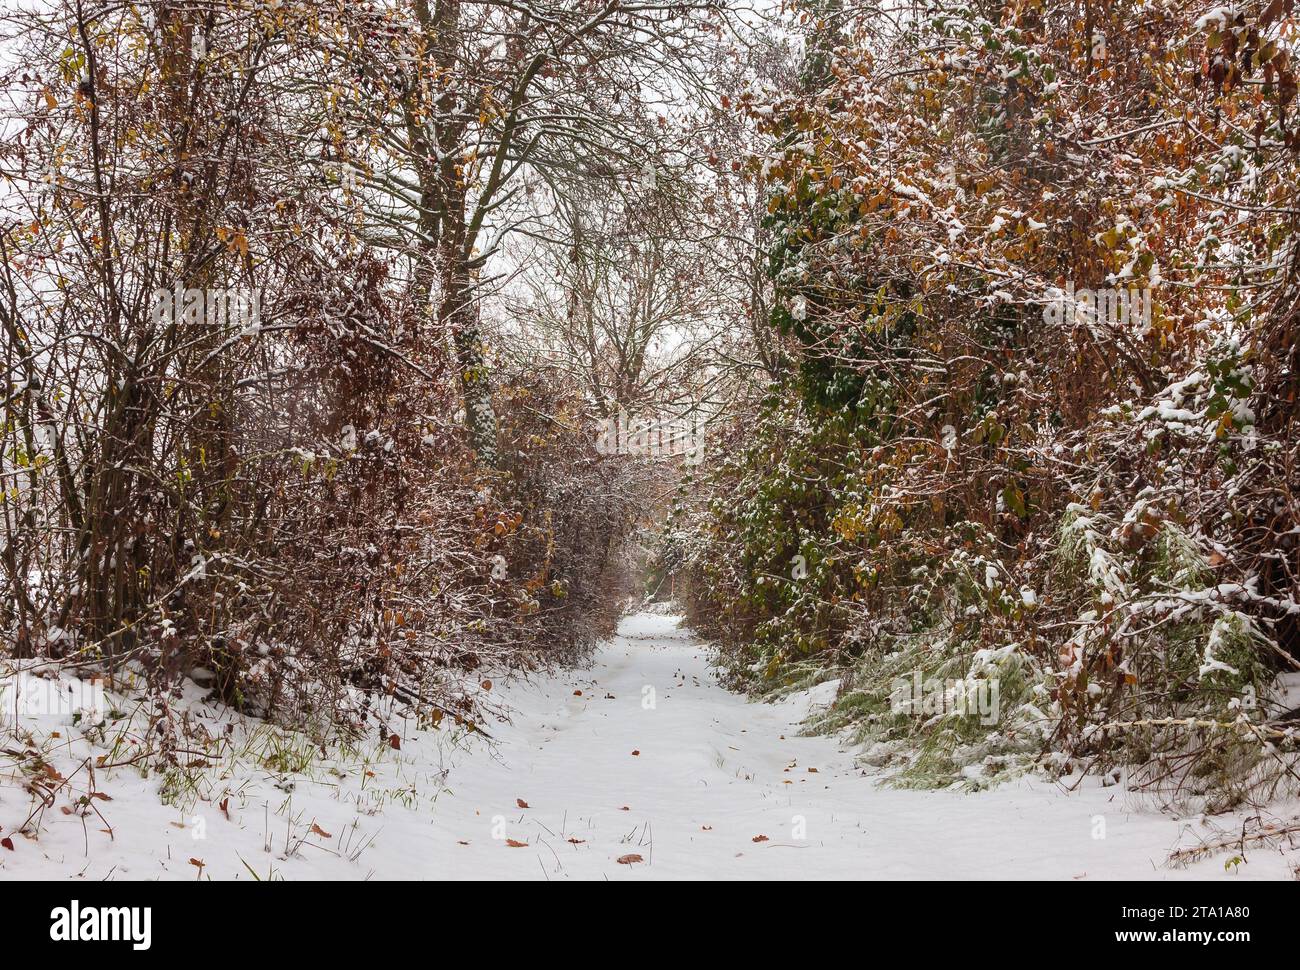 The beauty a country lane in Winter Stock Photo